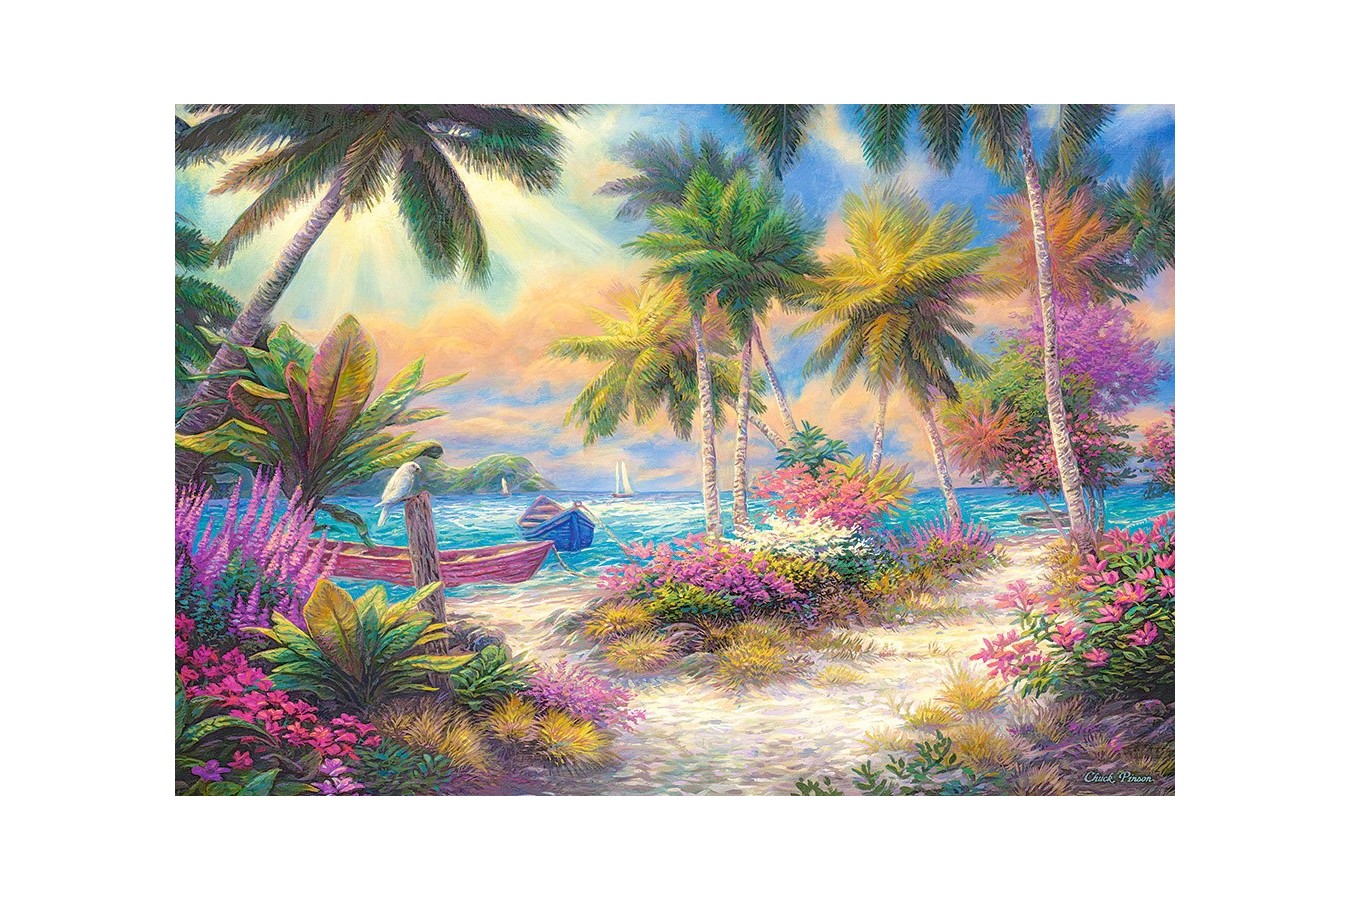 Puzzle Castorland - Isle of Palms, 1000 piese